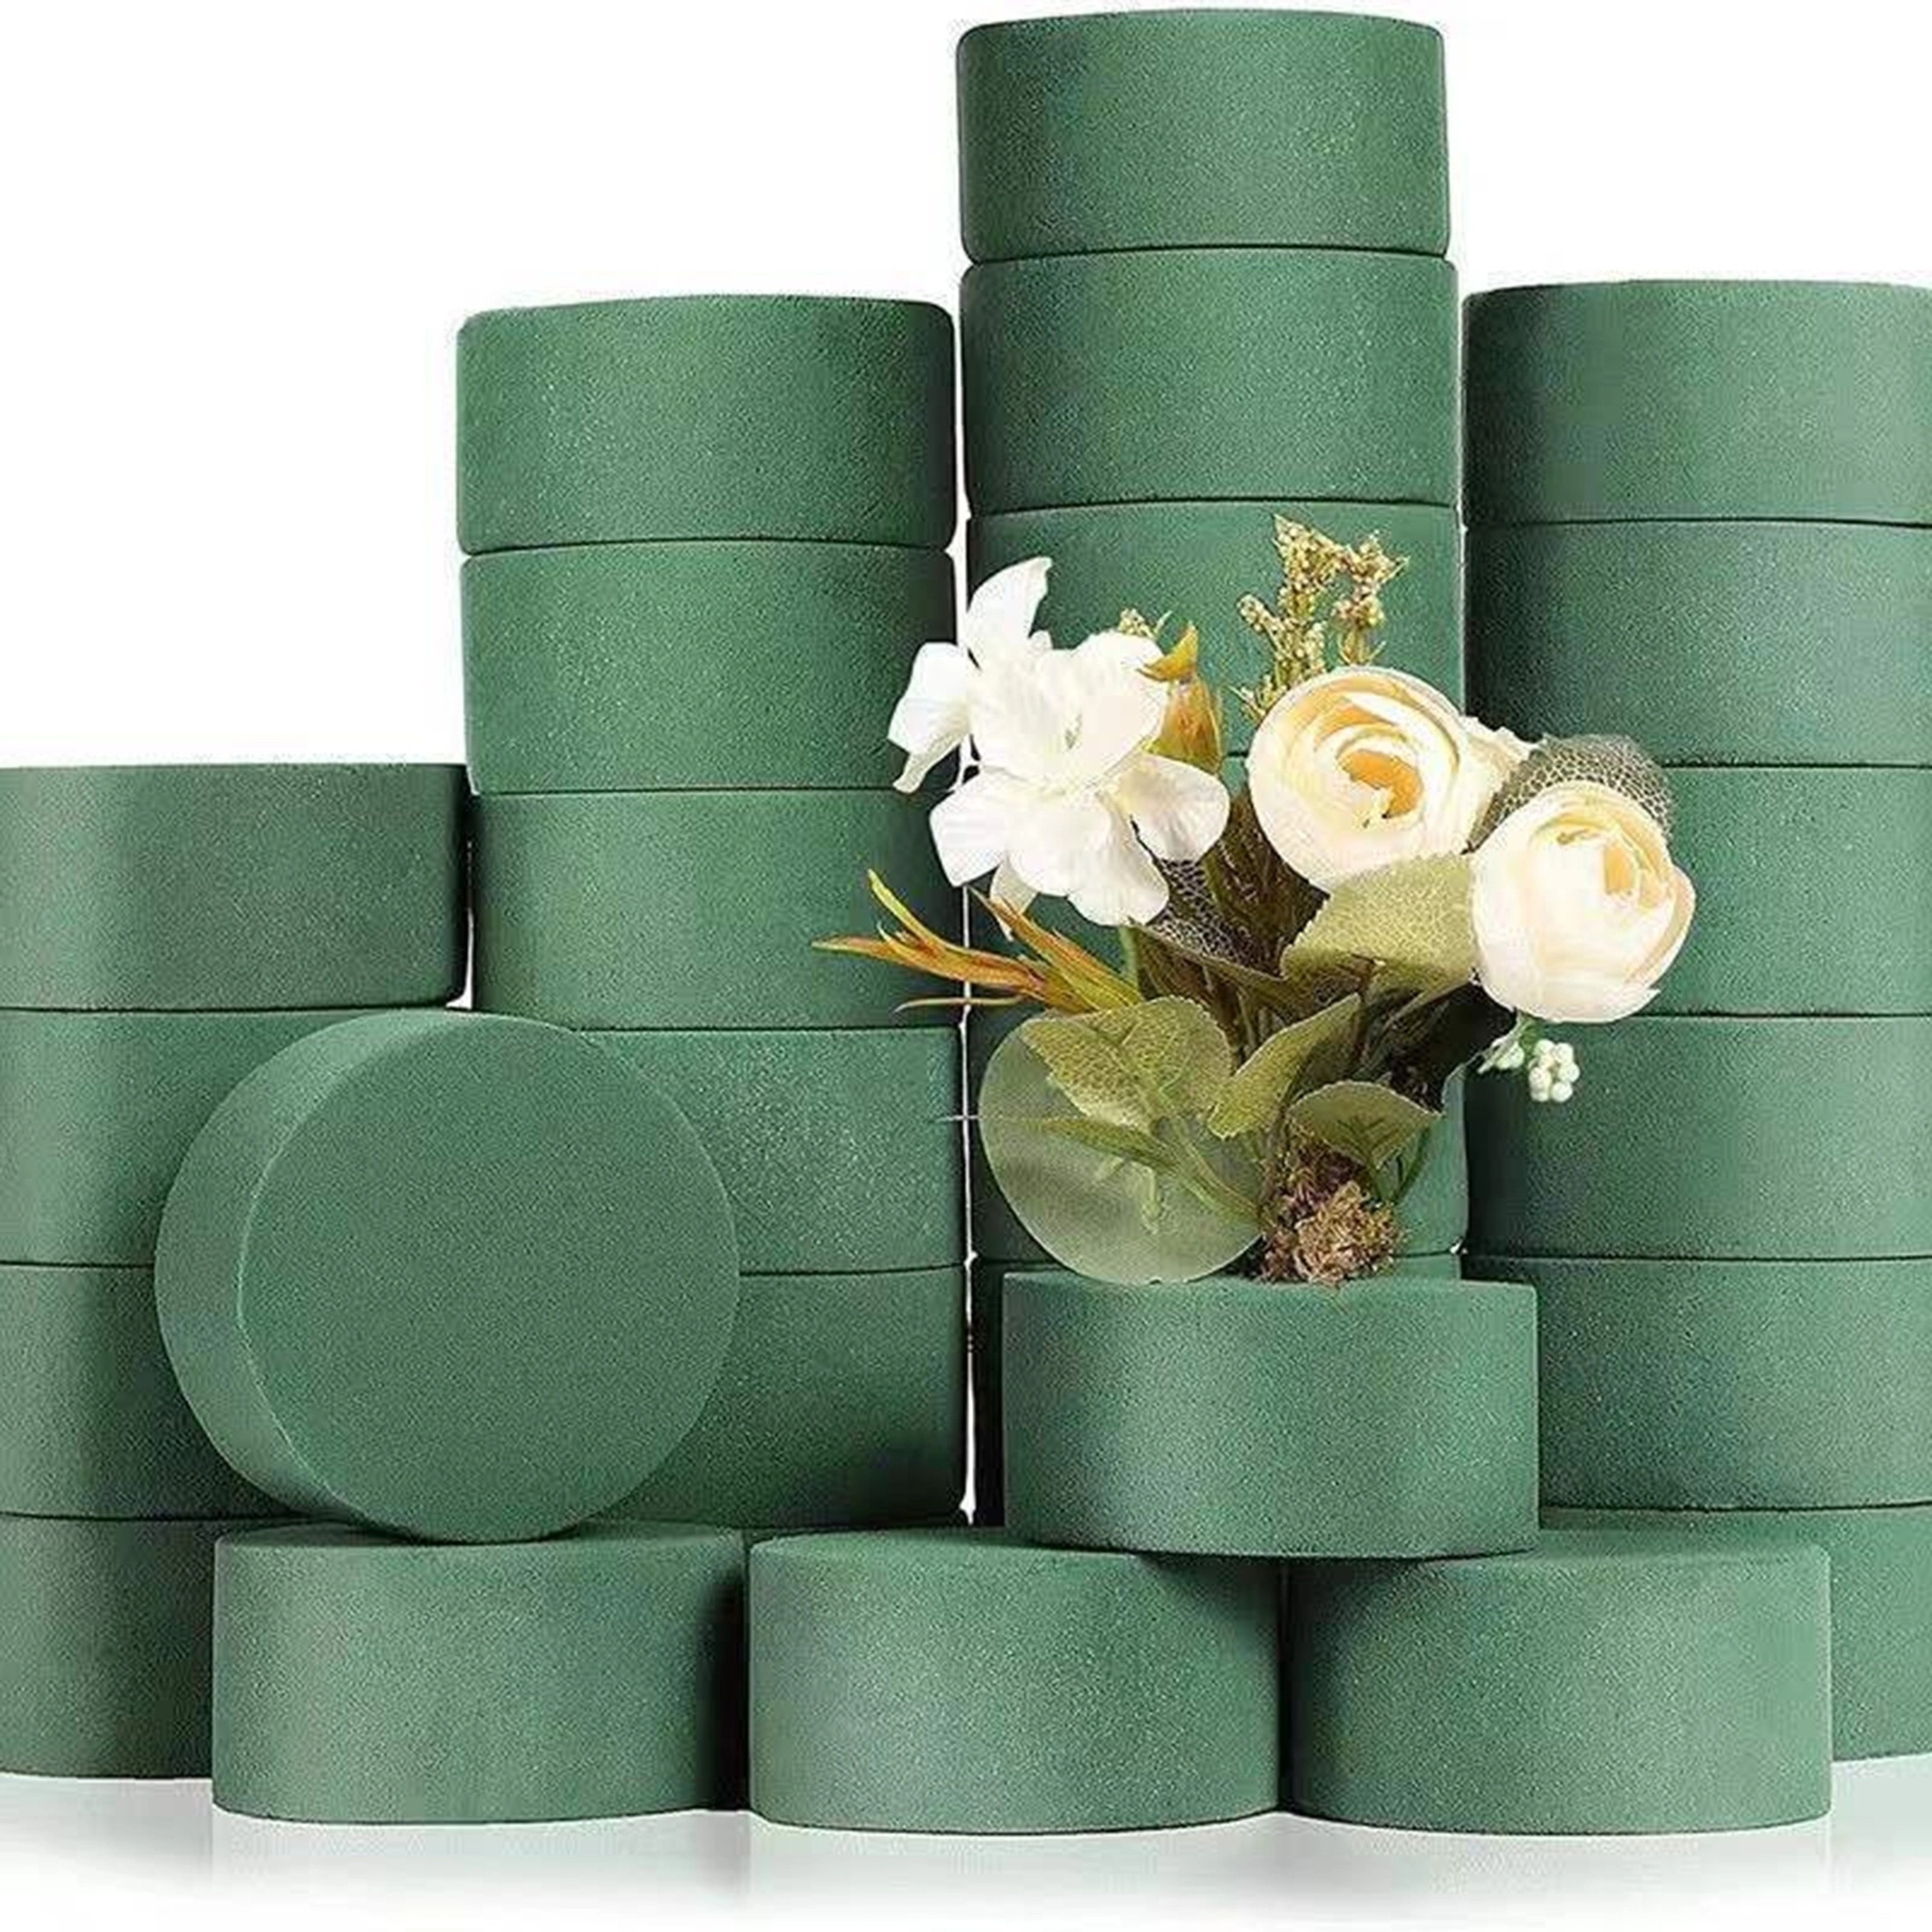 

10pcs - Round Cylindrical Flower Mud Dish Packaging Material - Flower Dry Flower Mud Reinforced Flower Arranging Mud